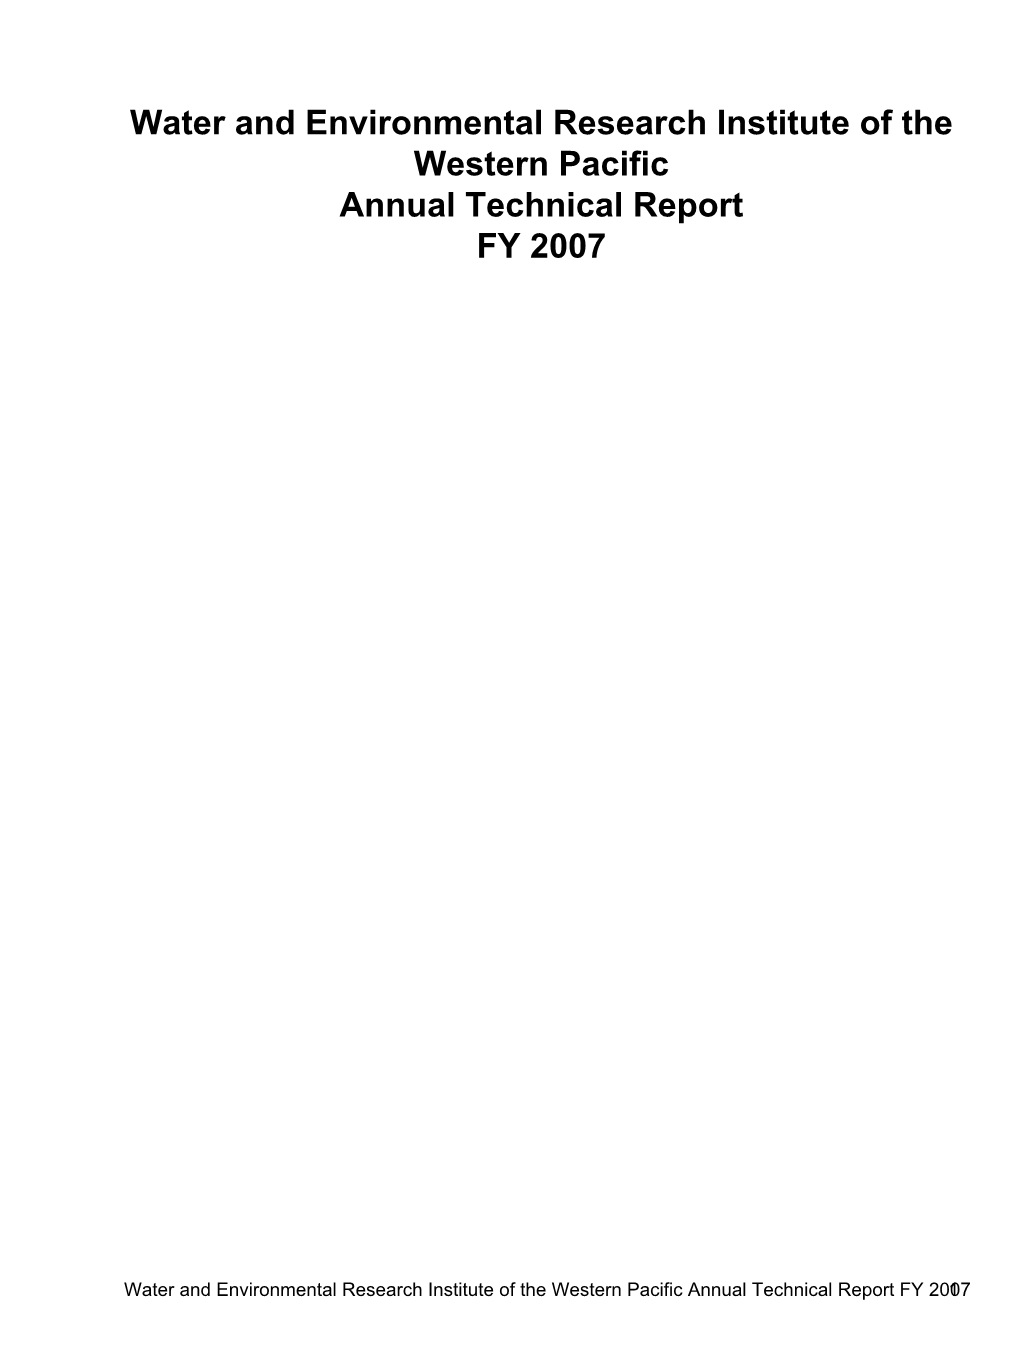 Water and Environmental Research Institute of the Western Pacific Annual Technical Report FY 2007